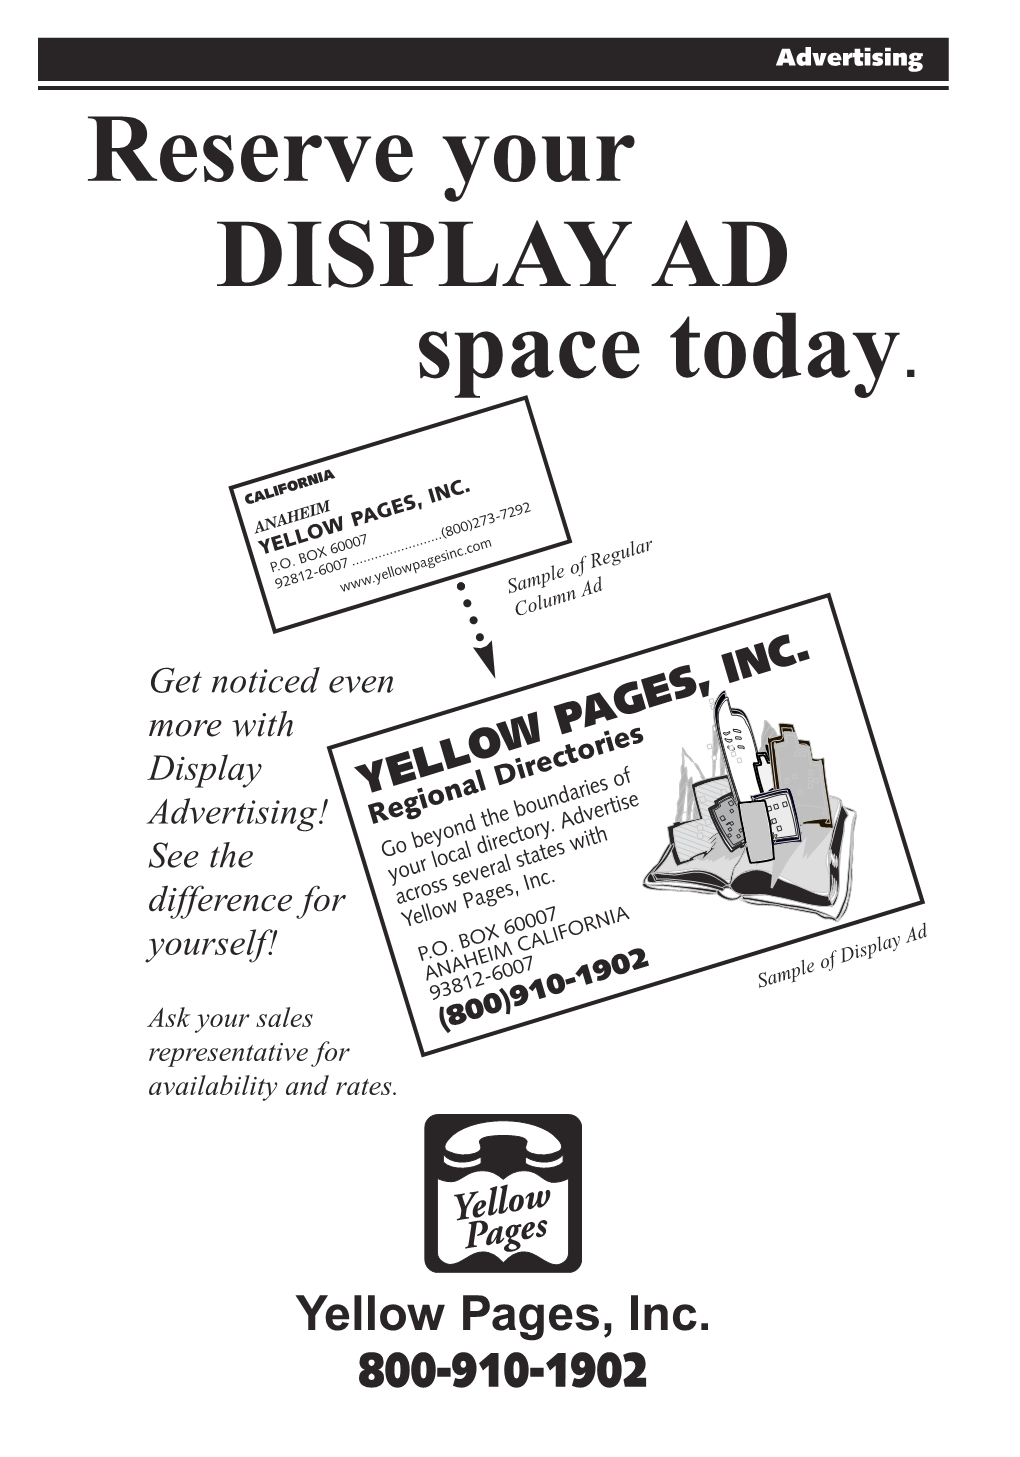 Reserve Your DISPLAY AD Space Today